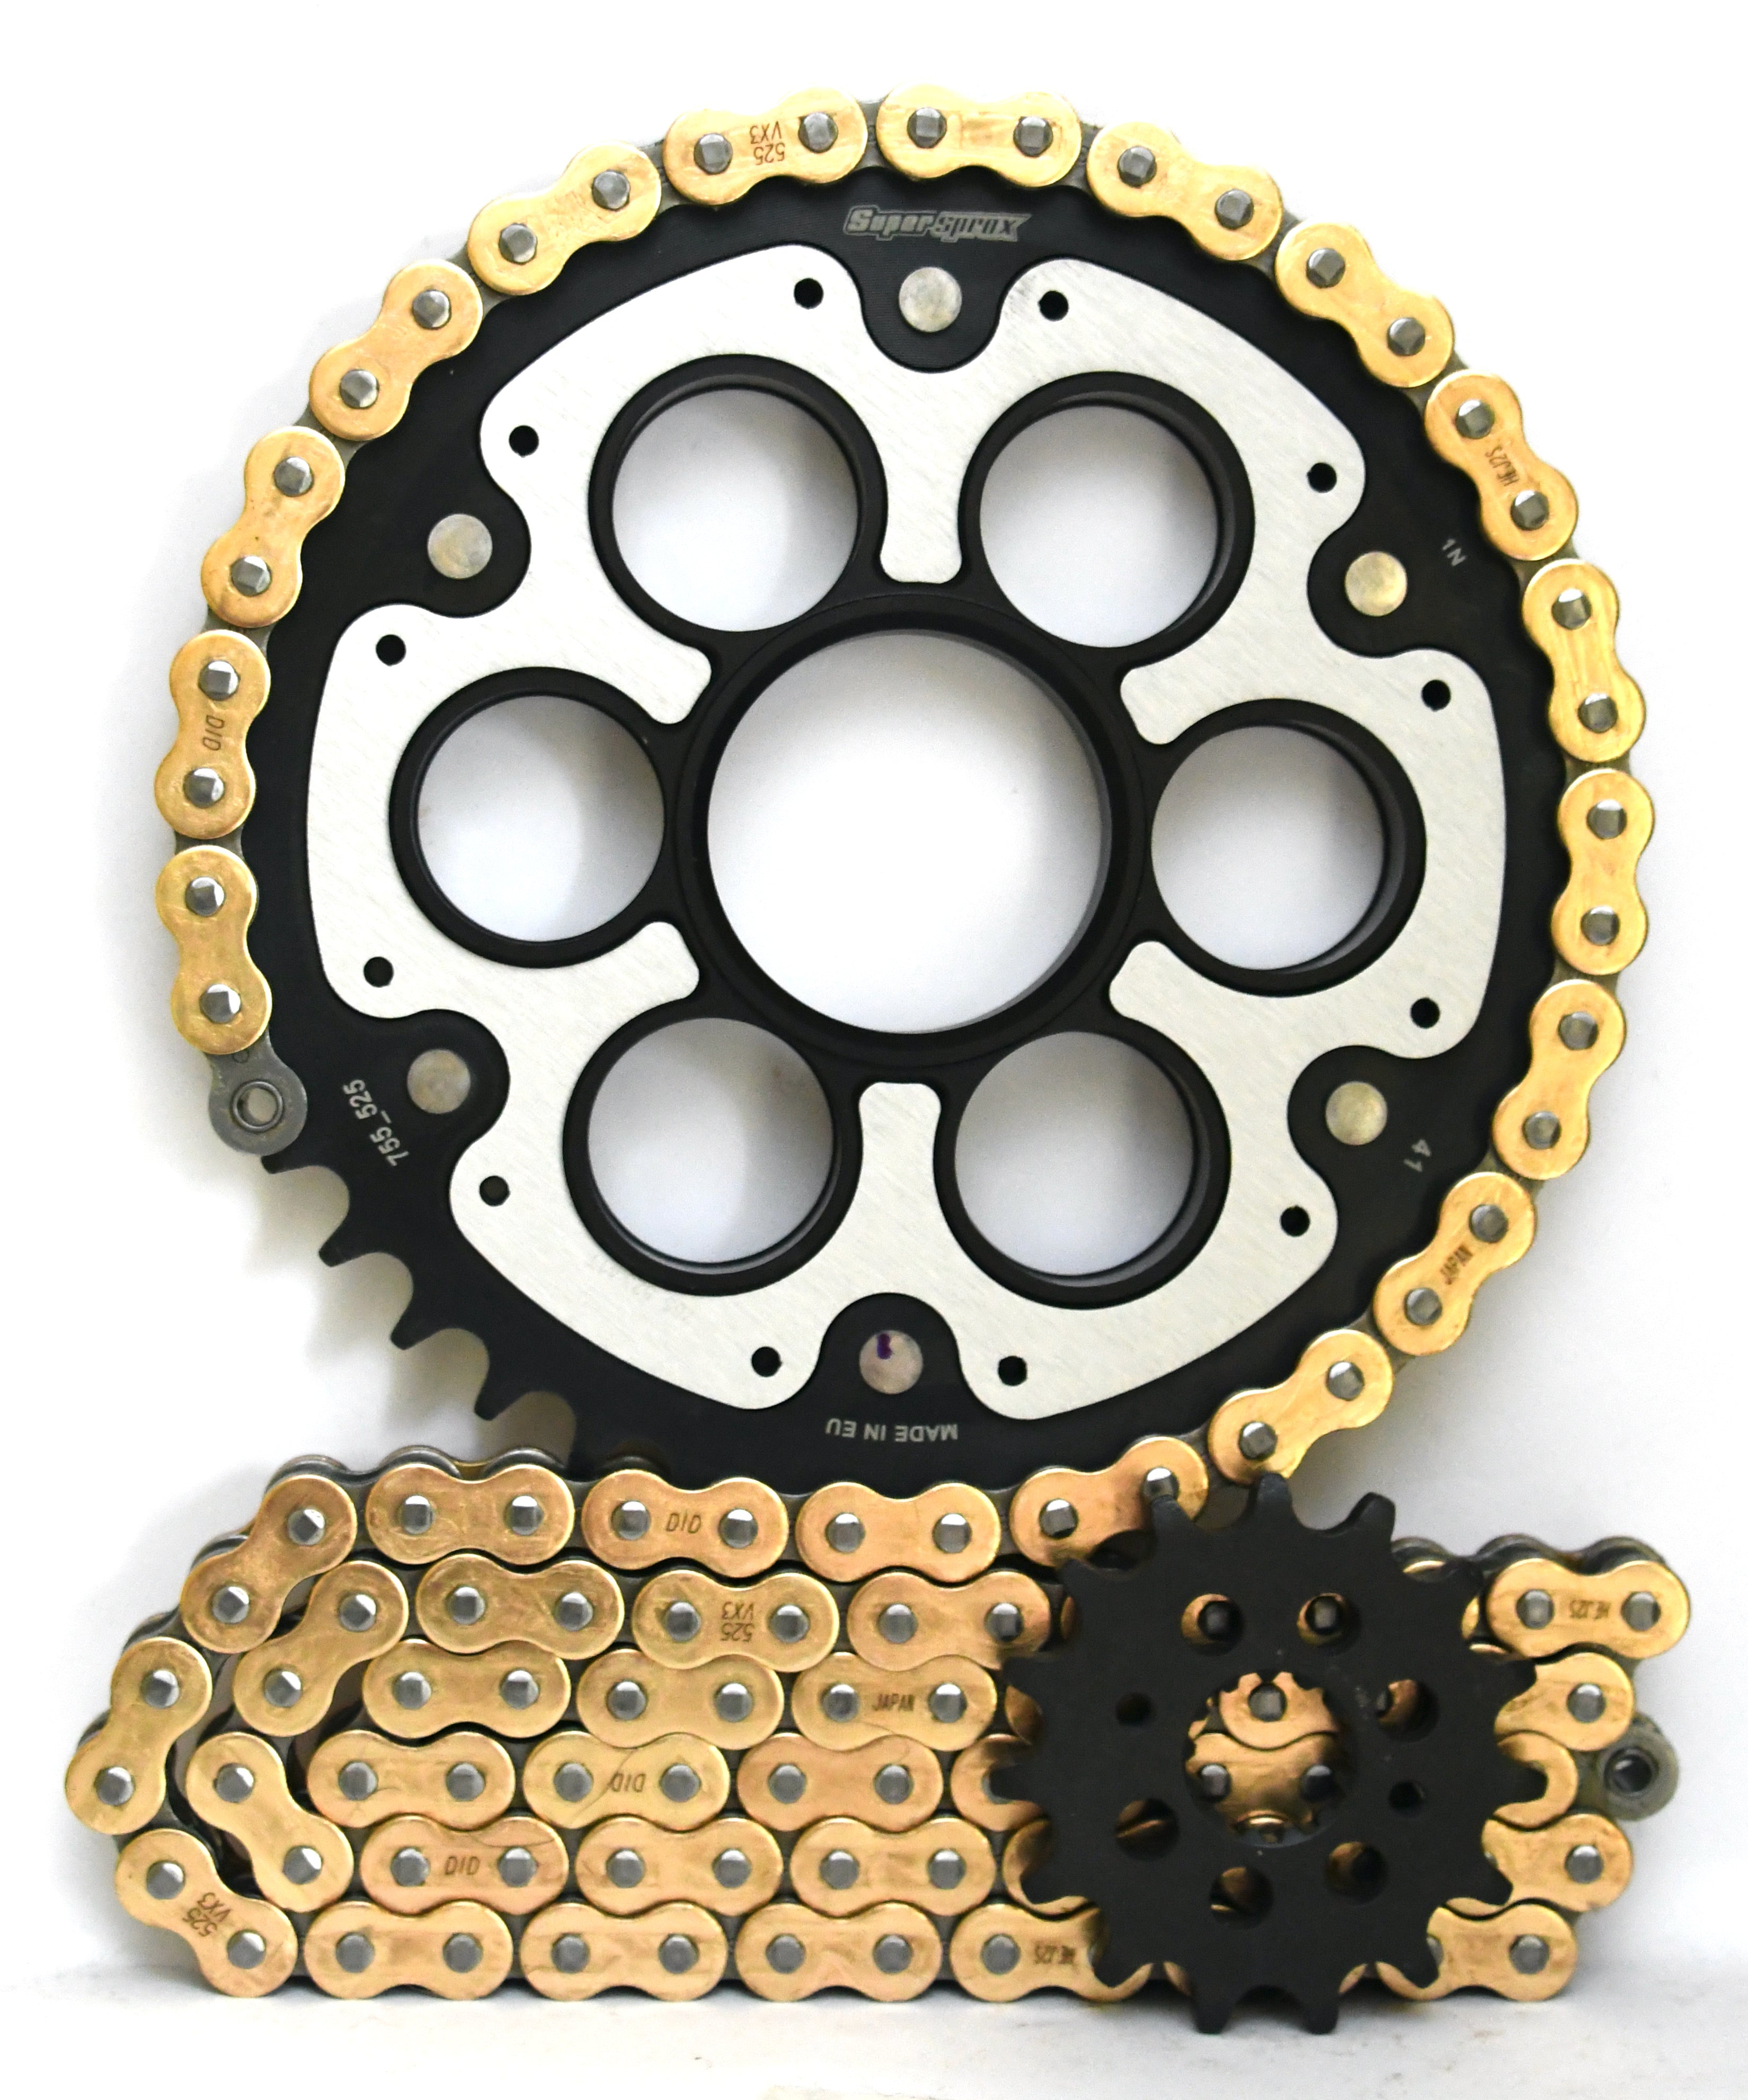 Supersprox Chain & Sprocket Kit for Ducati 1100 Streetfighter 2009-2011 - Standard Gearing